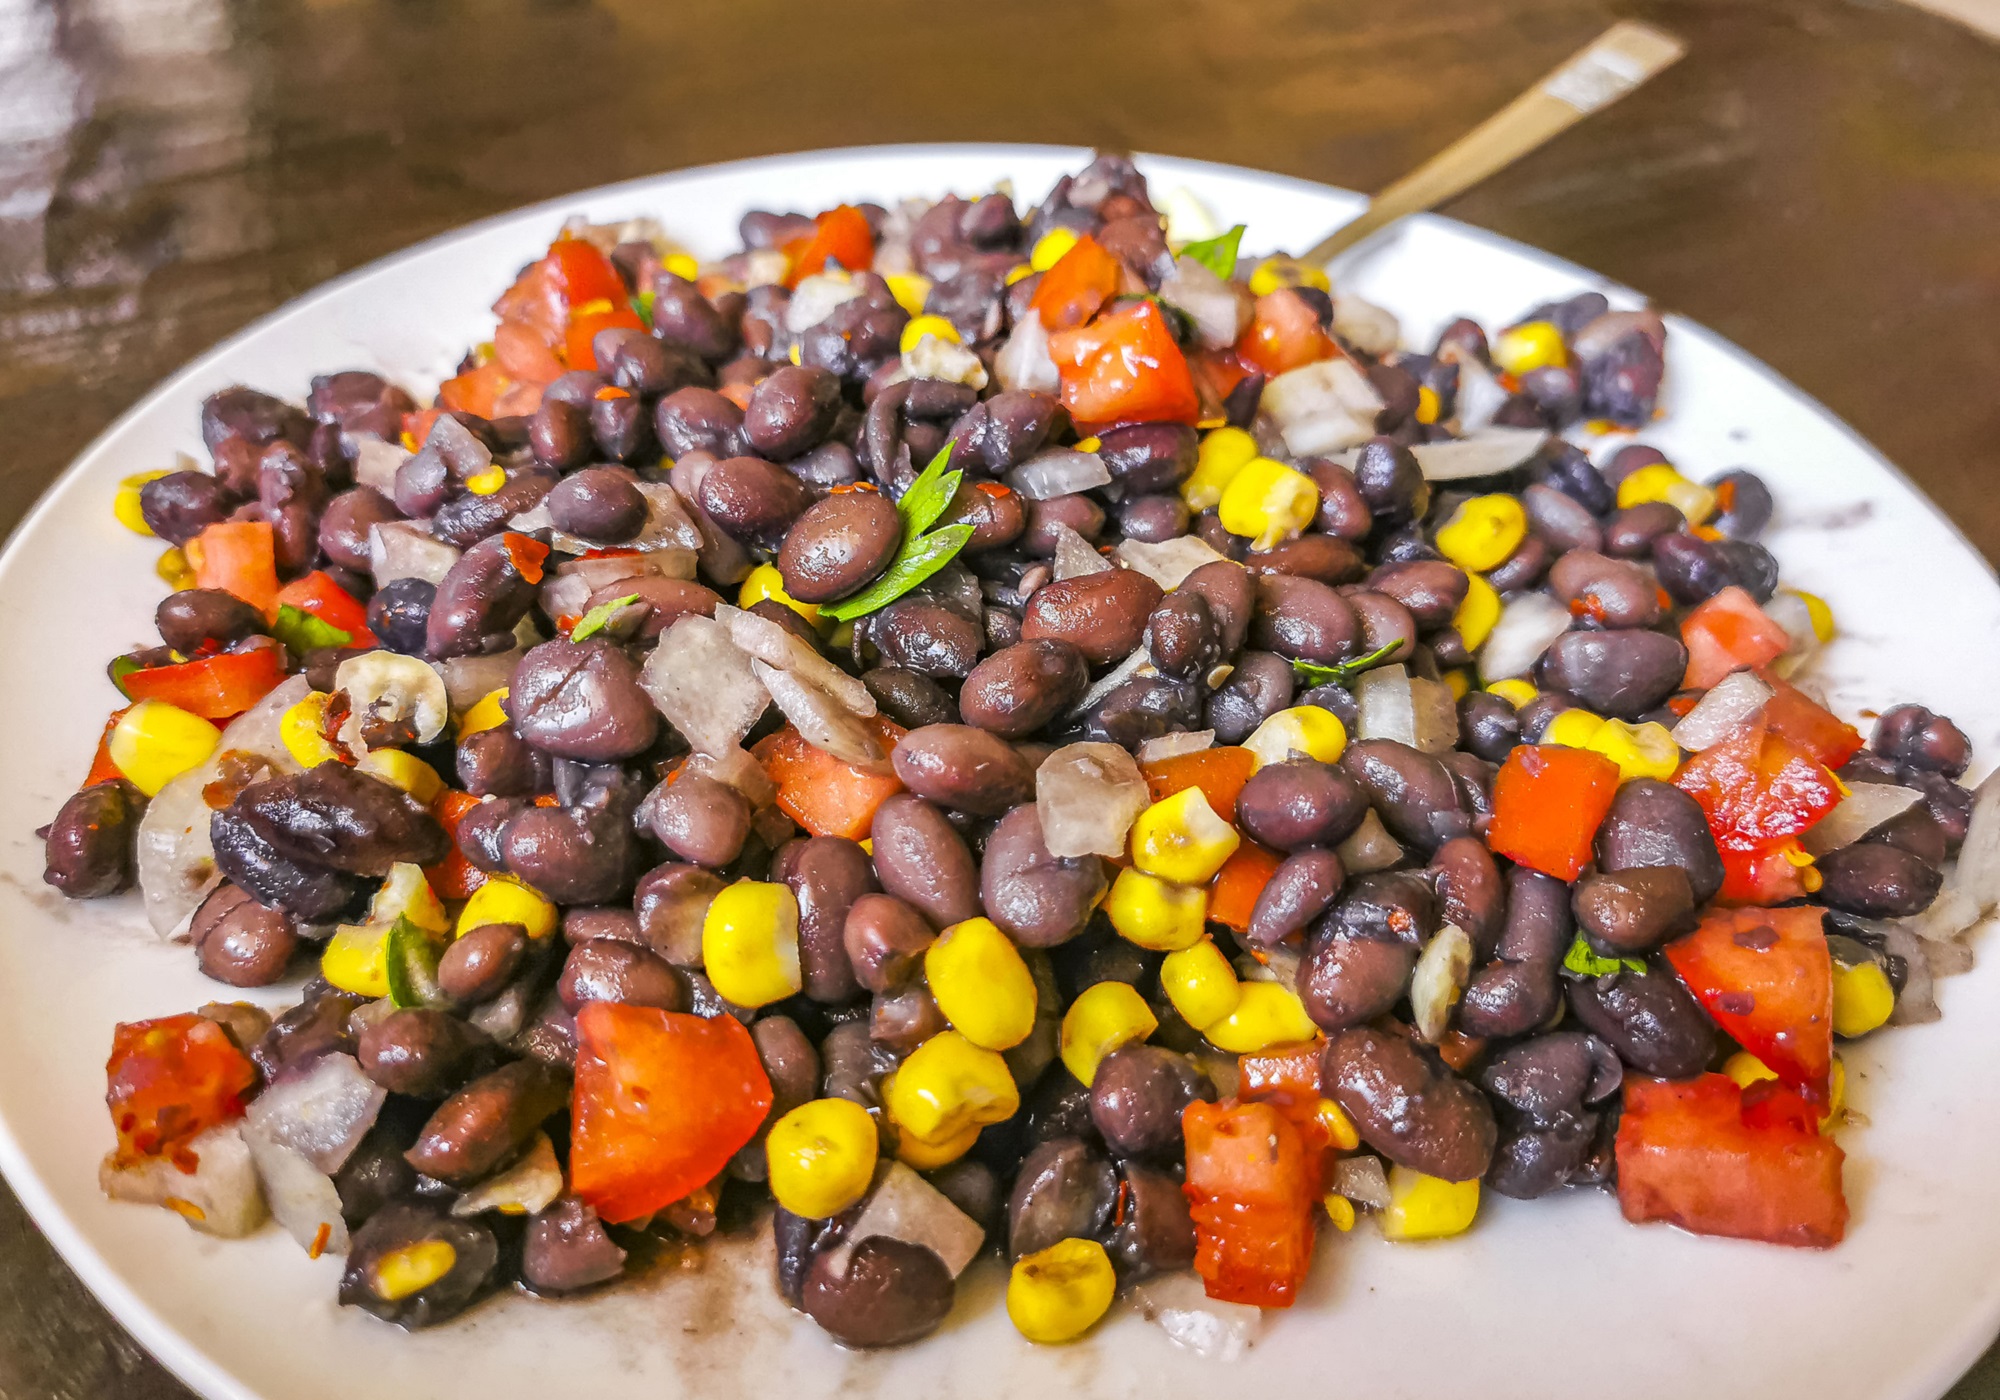 Kidney beans black beans, corn, and tomatoes can all increase your daily fiber intake